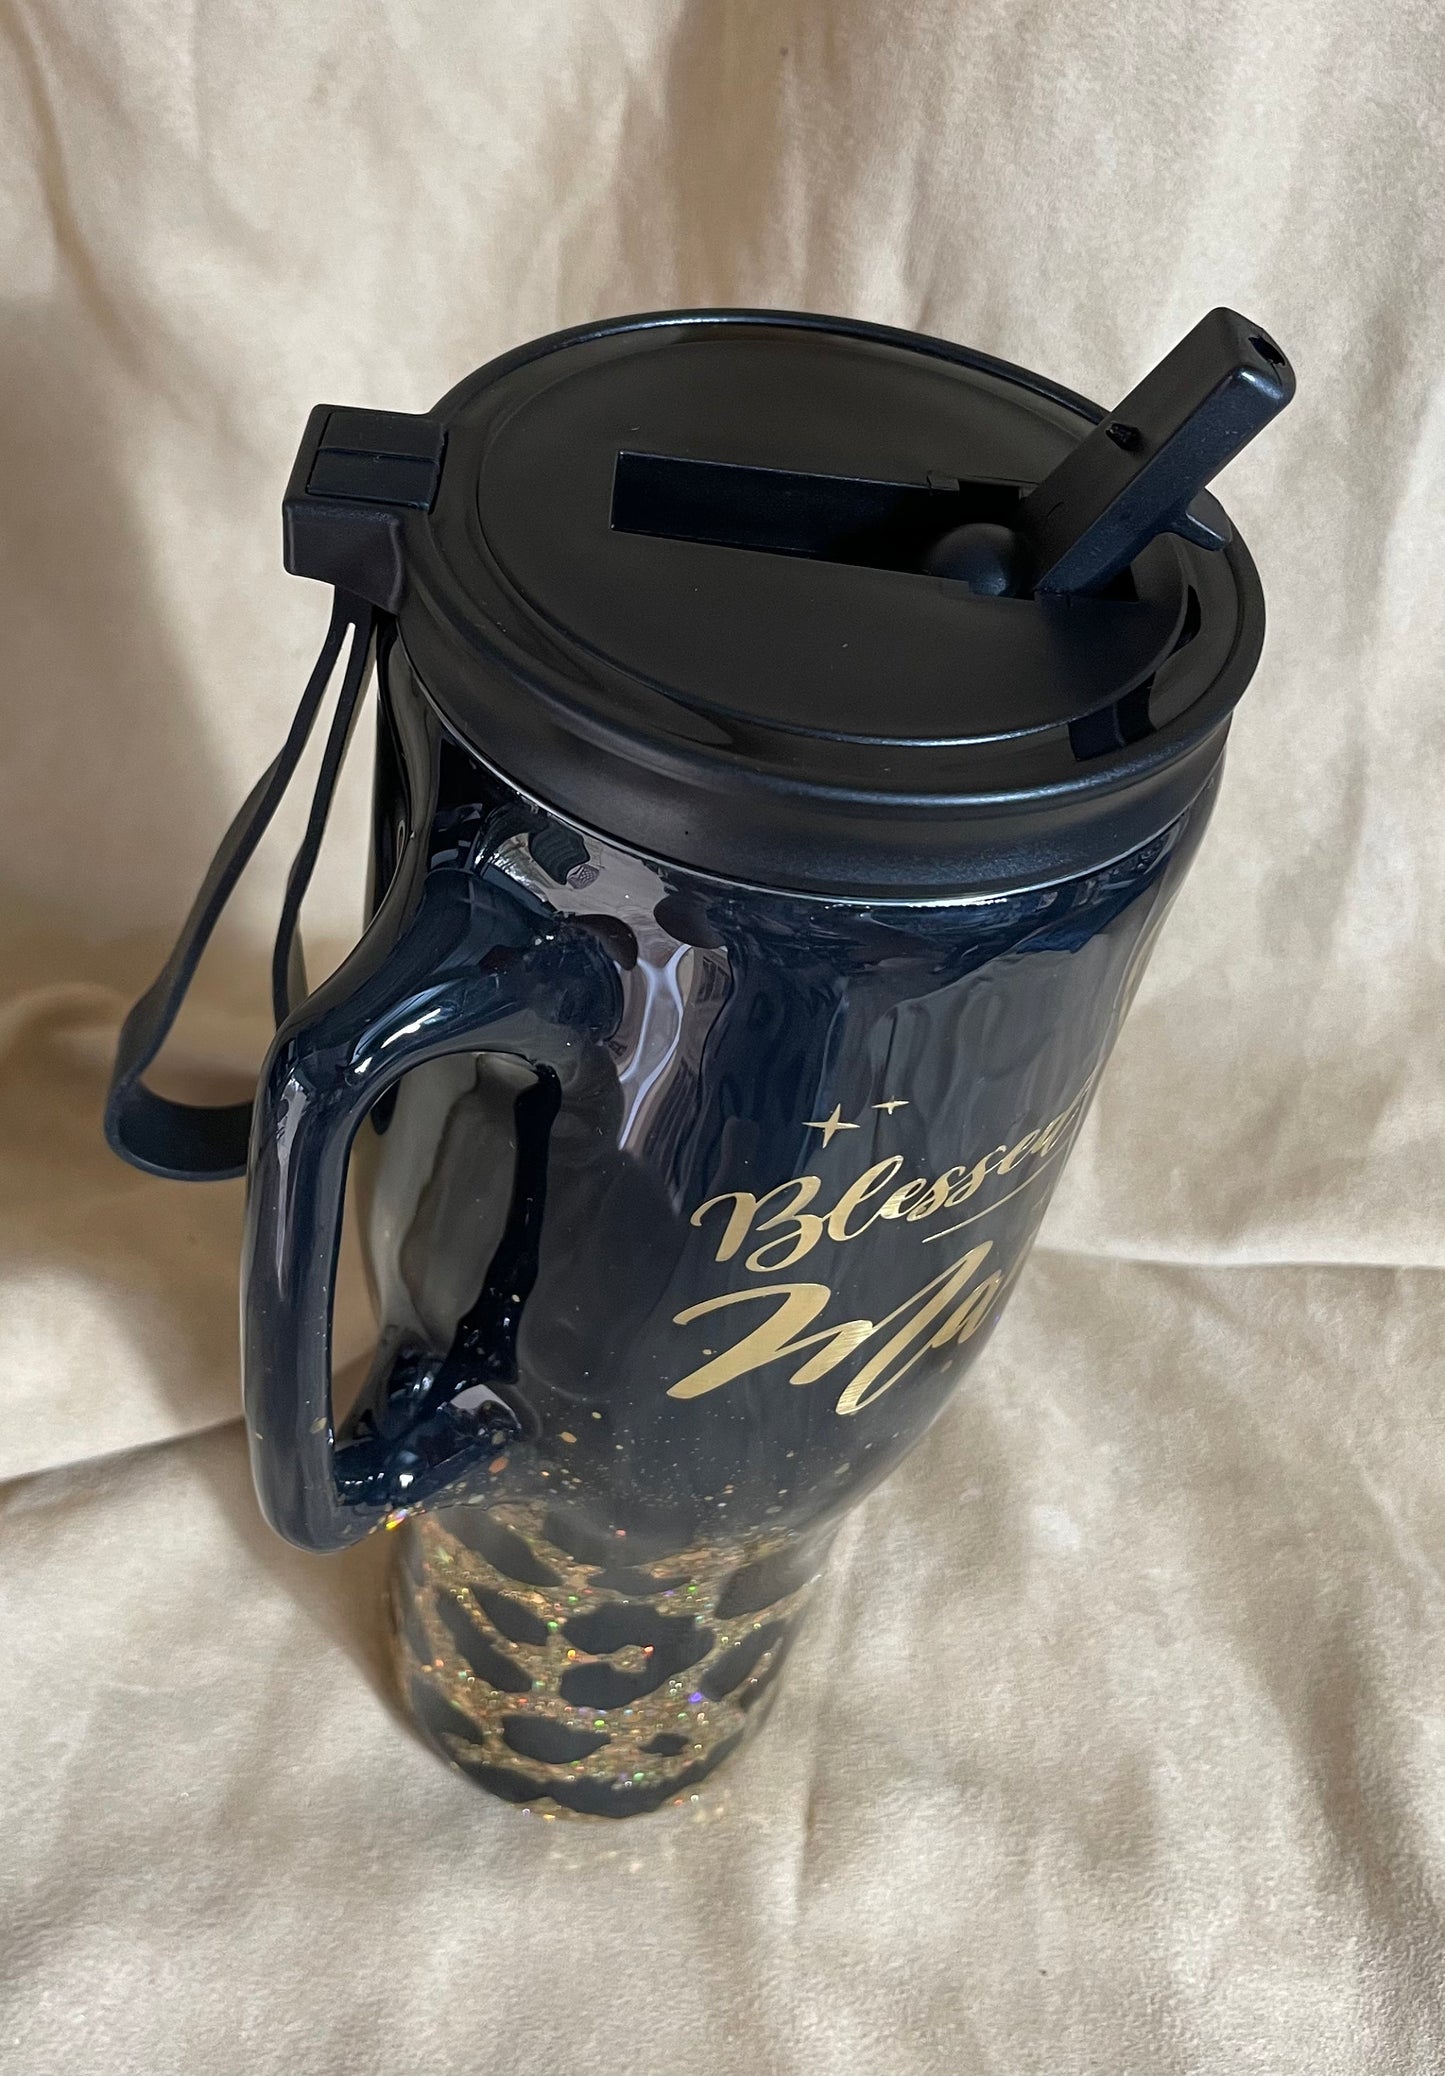 Animal print tumbler, glitter tumbler, black cup with gold glitter and gold lettering, gift for mother, daughter, sister, wife, girlfriend